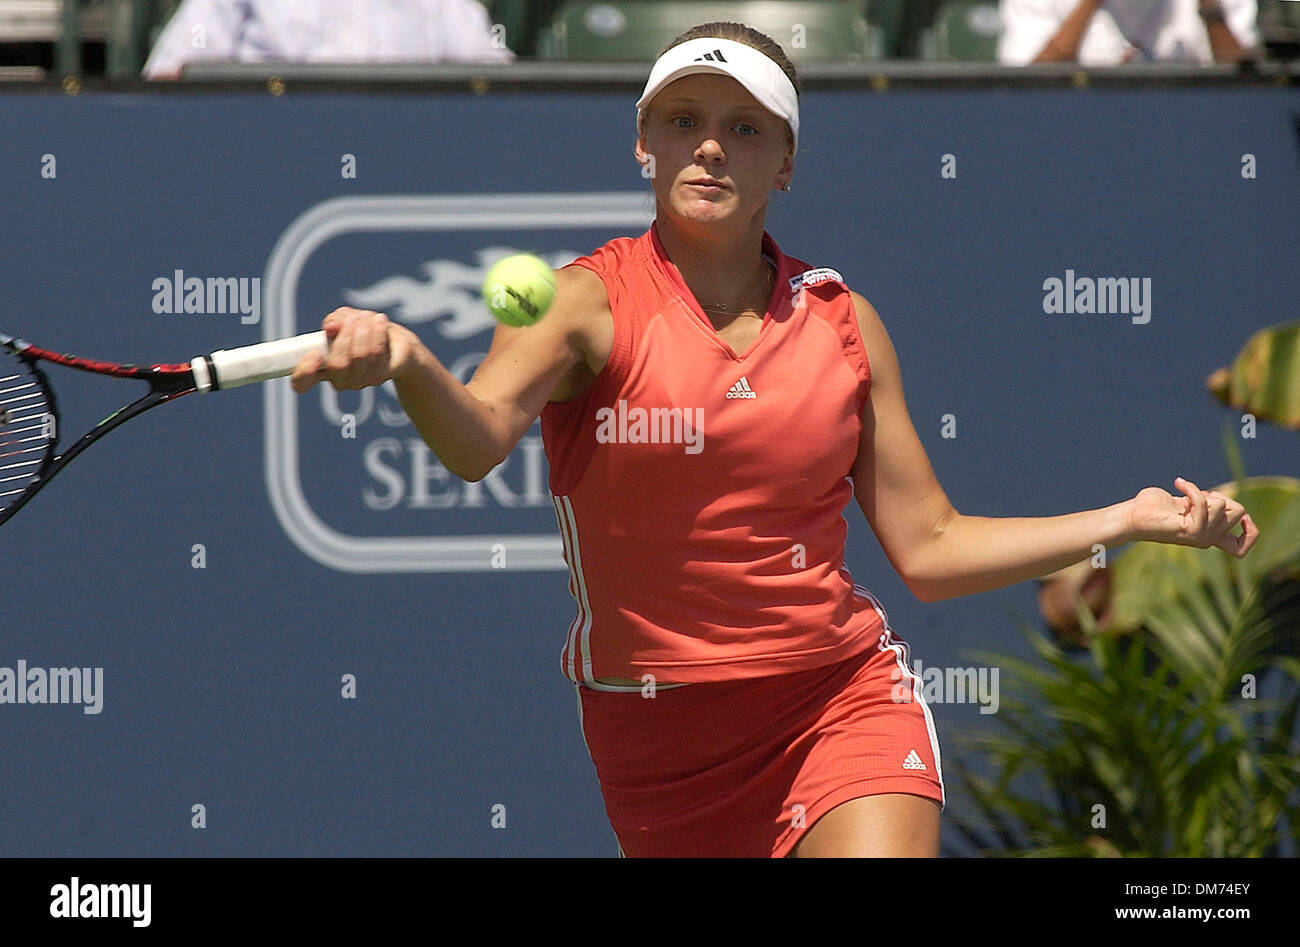 August 11, 2005; Carson, CA, USA; WTA pro ANNA CHAKVETADZE during the JPMorgan Chase Open at the Home Depot Center. Mandatory Credit: Photo by Vaughn Youtz/ZUMA Press. (©) Copyright 2005 by Vaughn Youtz. Stock Photo